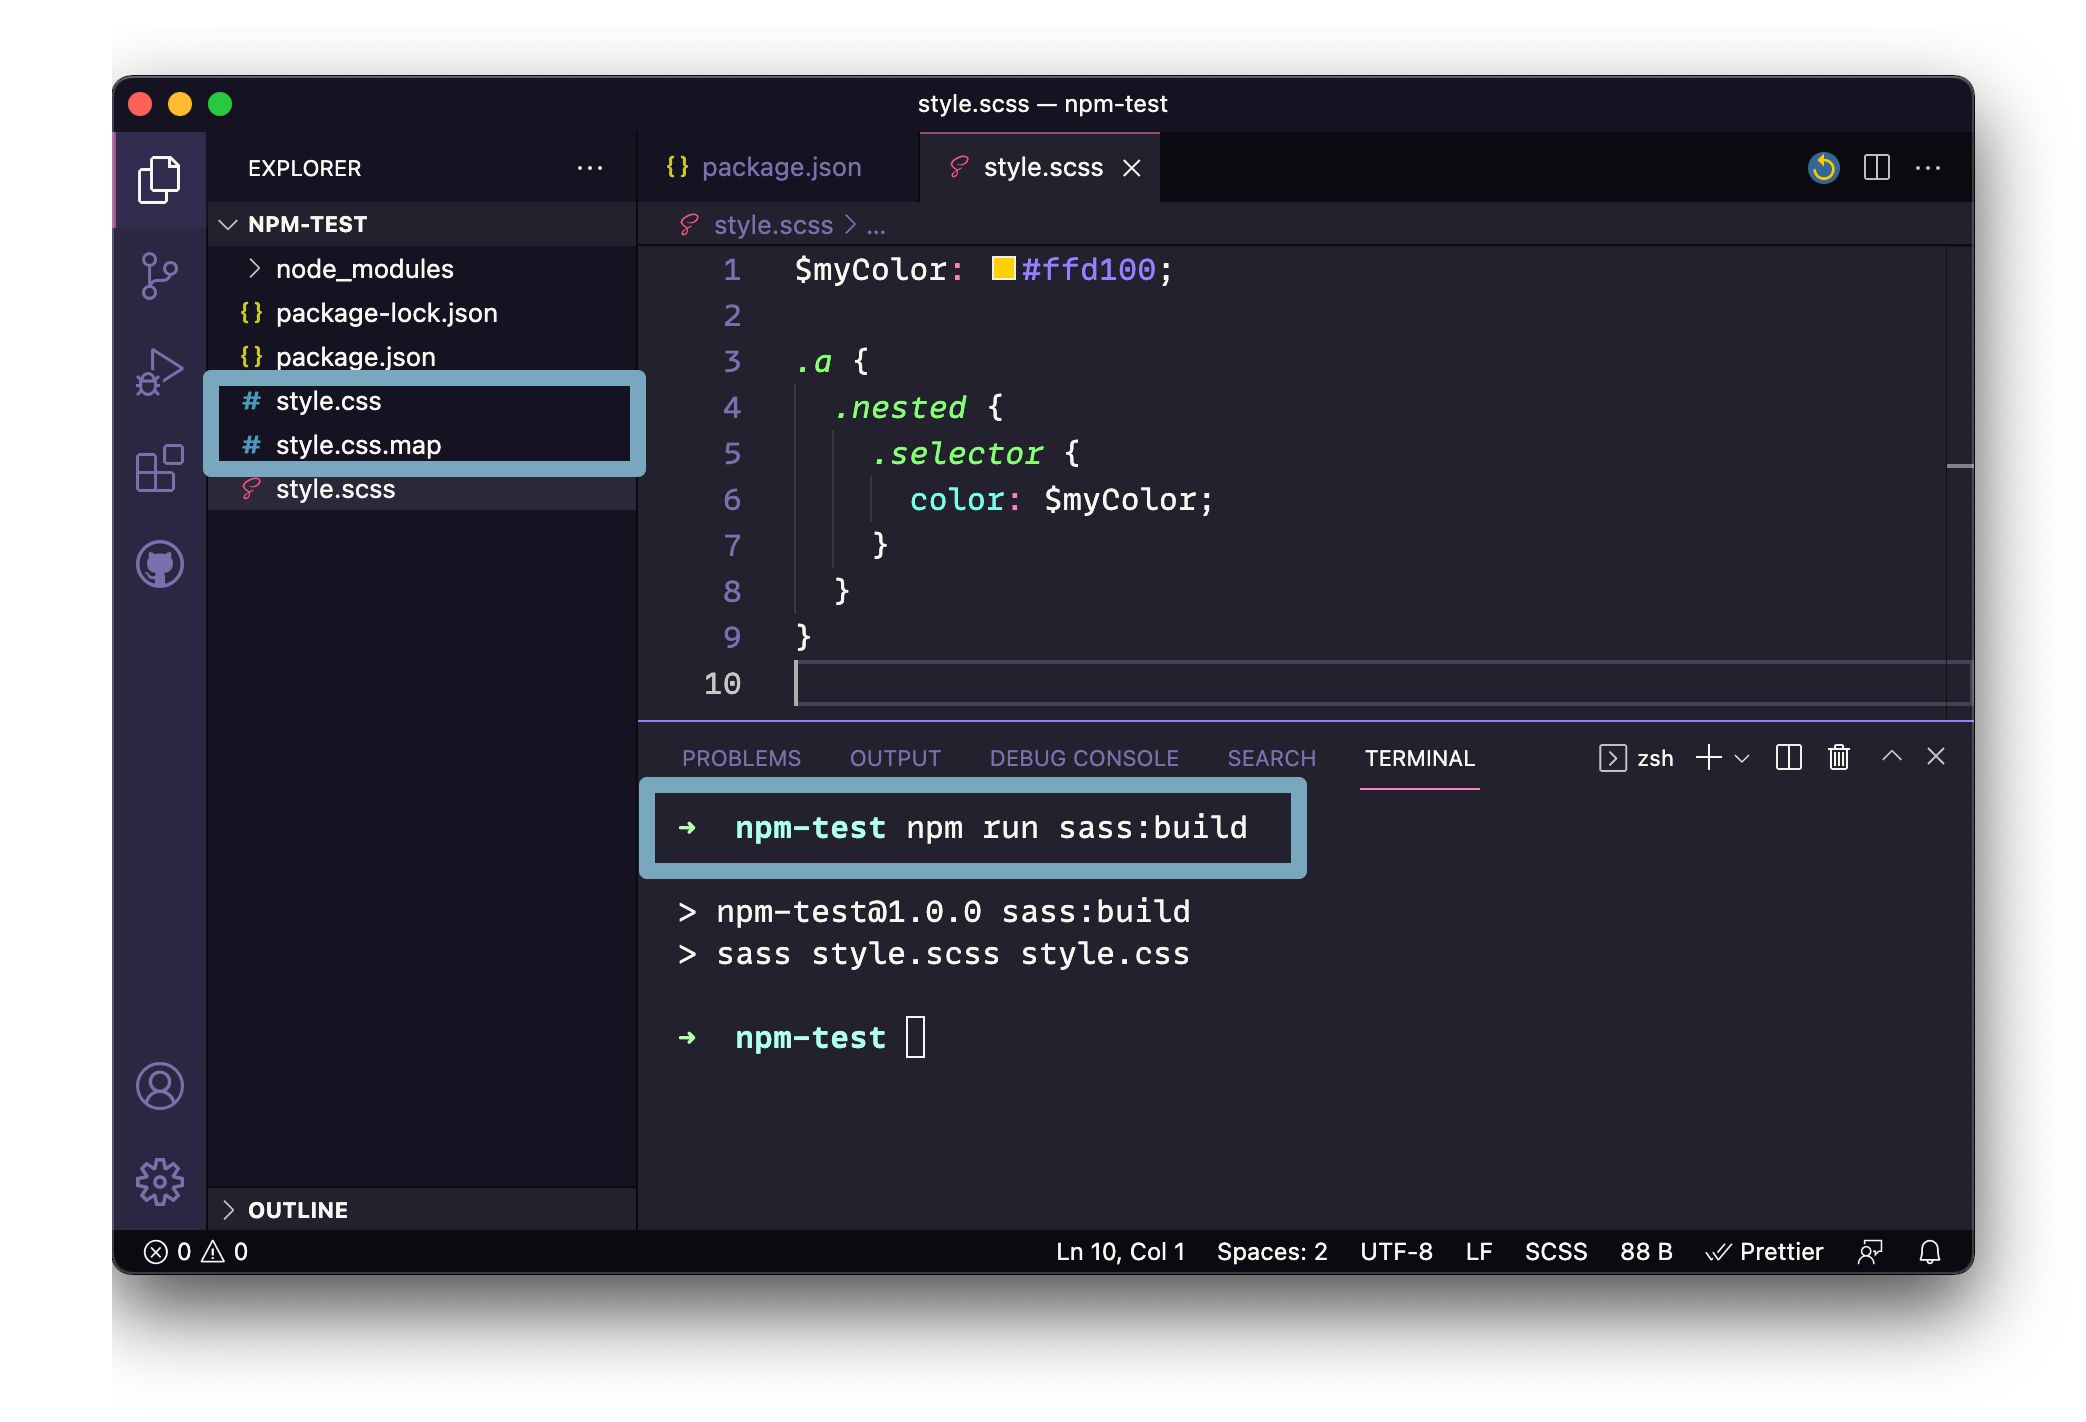 Screenshot of the VS Code app with a style.scss file open and an open terminal below that with npm commands, including npm run sass:build.